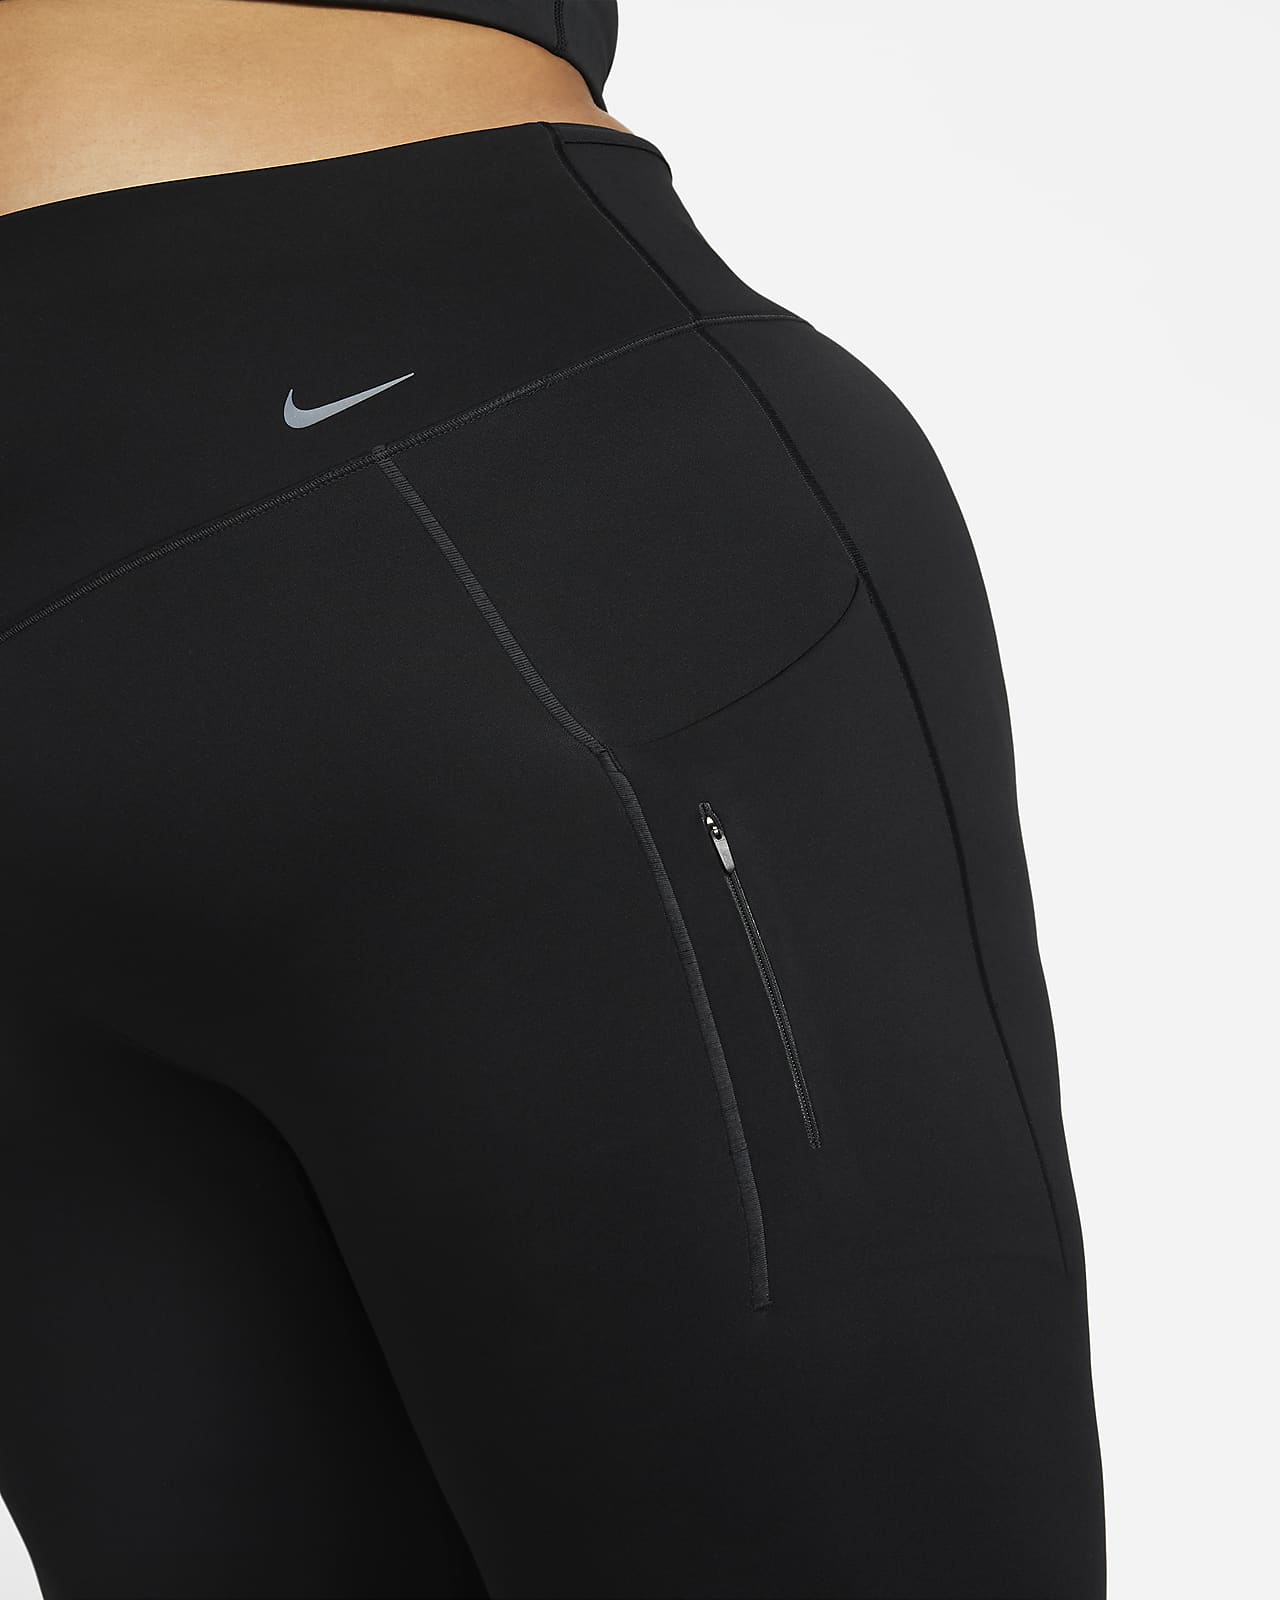 the perfect leggings do exist―the new @nike Go Leggings. suctions